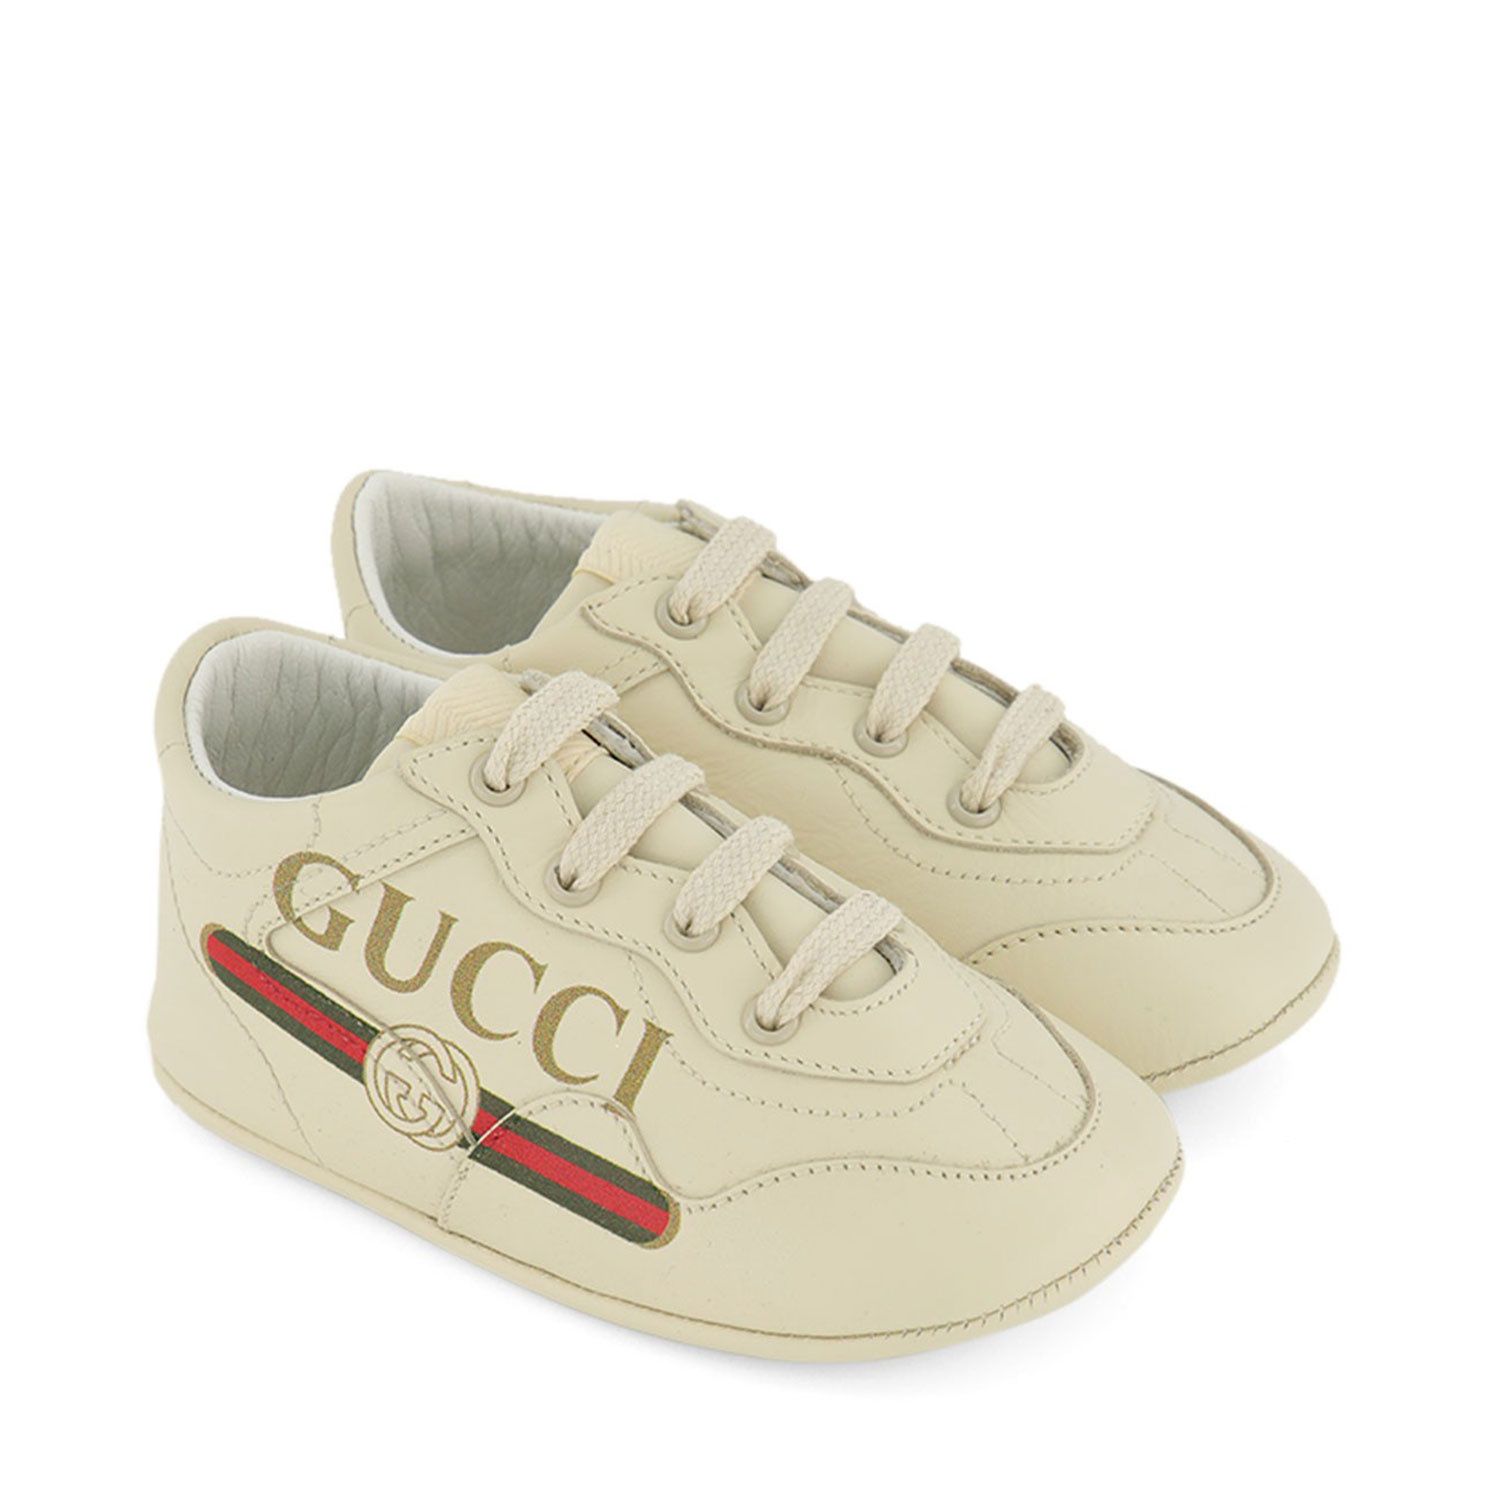 Gucci 612786 Unisex Off White at Coccinelle